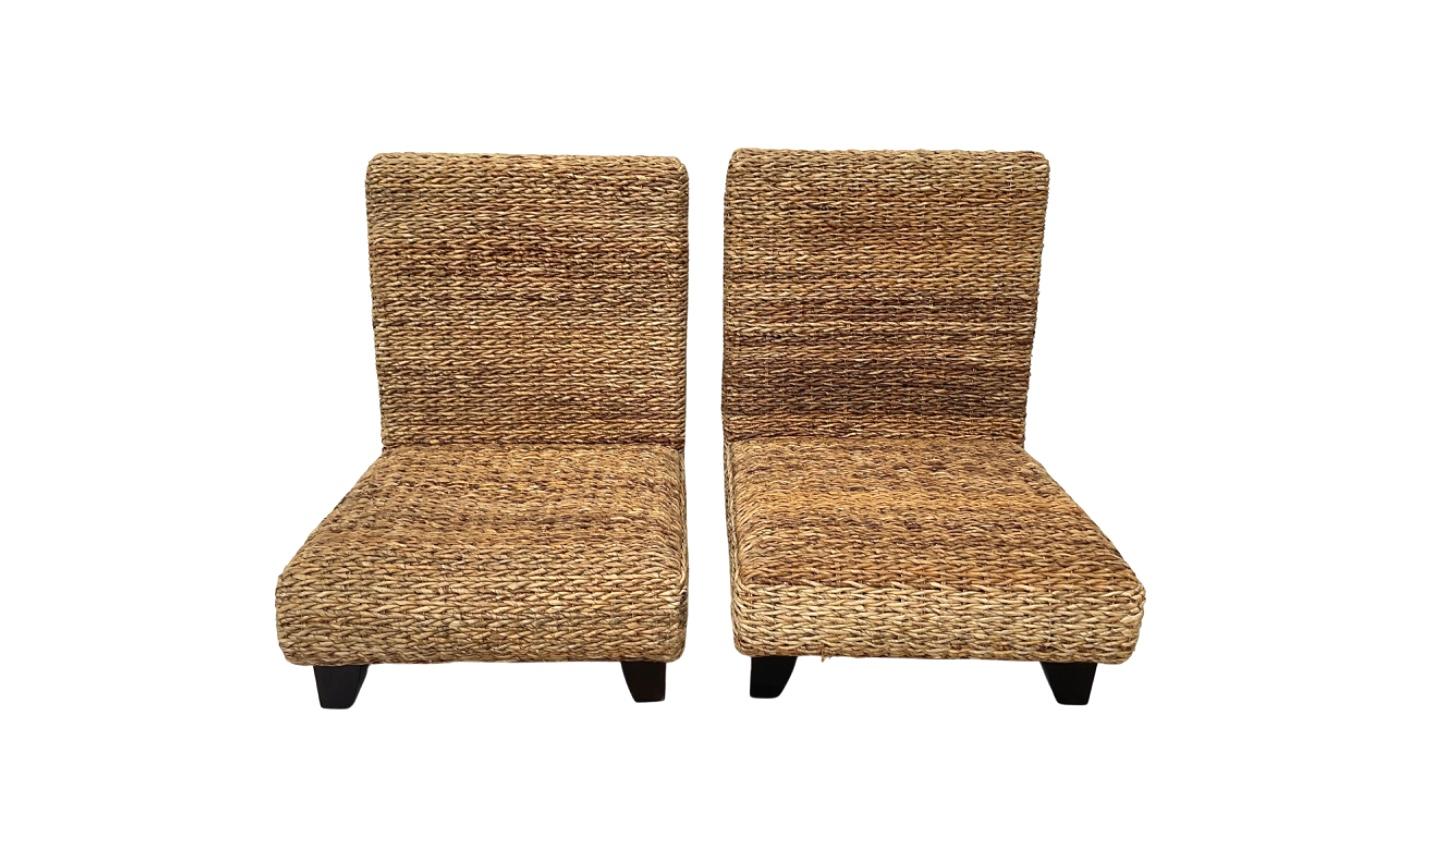 Pair Of Modern Woven Wicker Slipper Chairs In Good Condition For Sale In Bradenton, FL